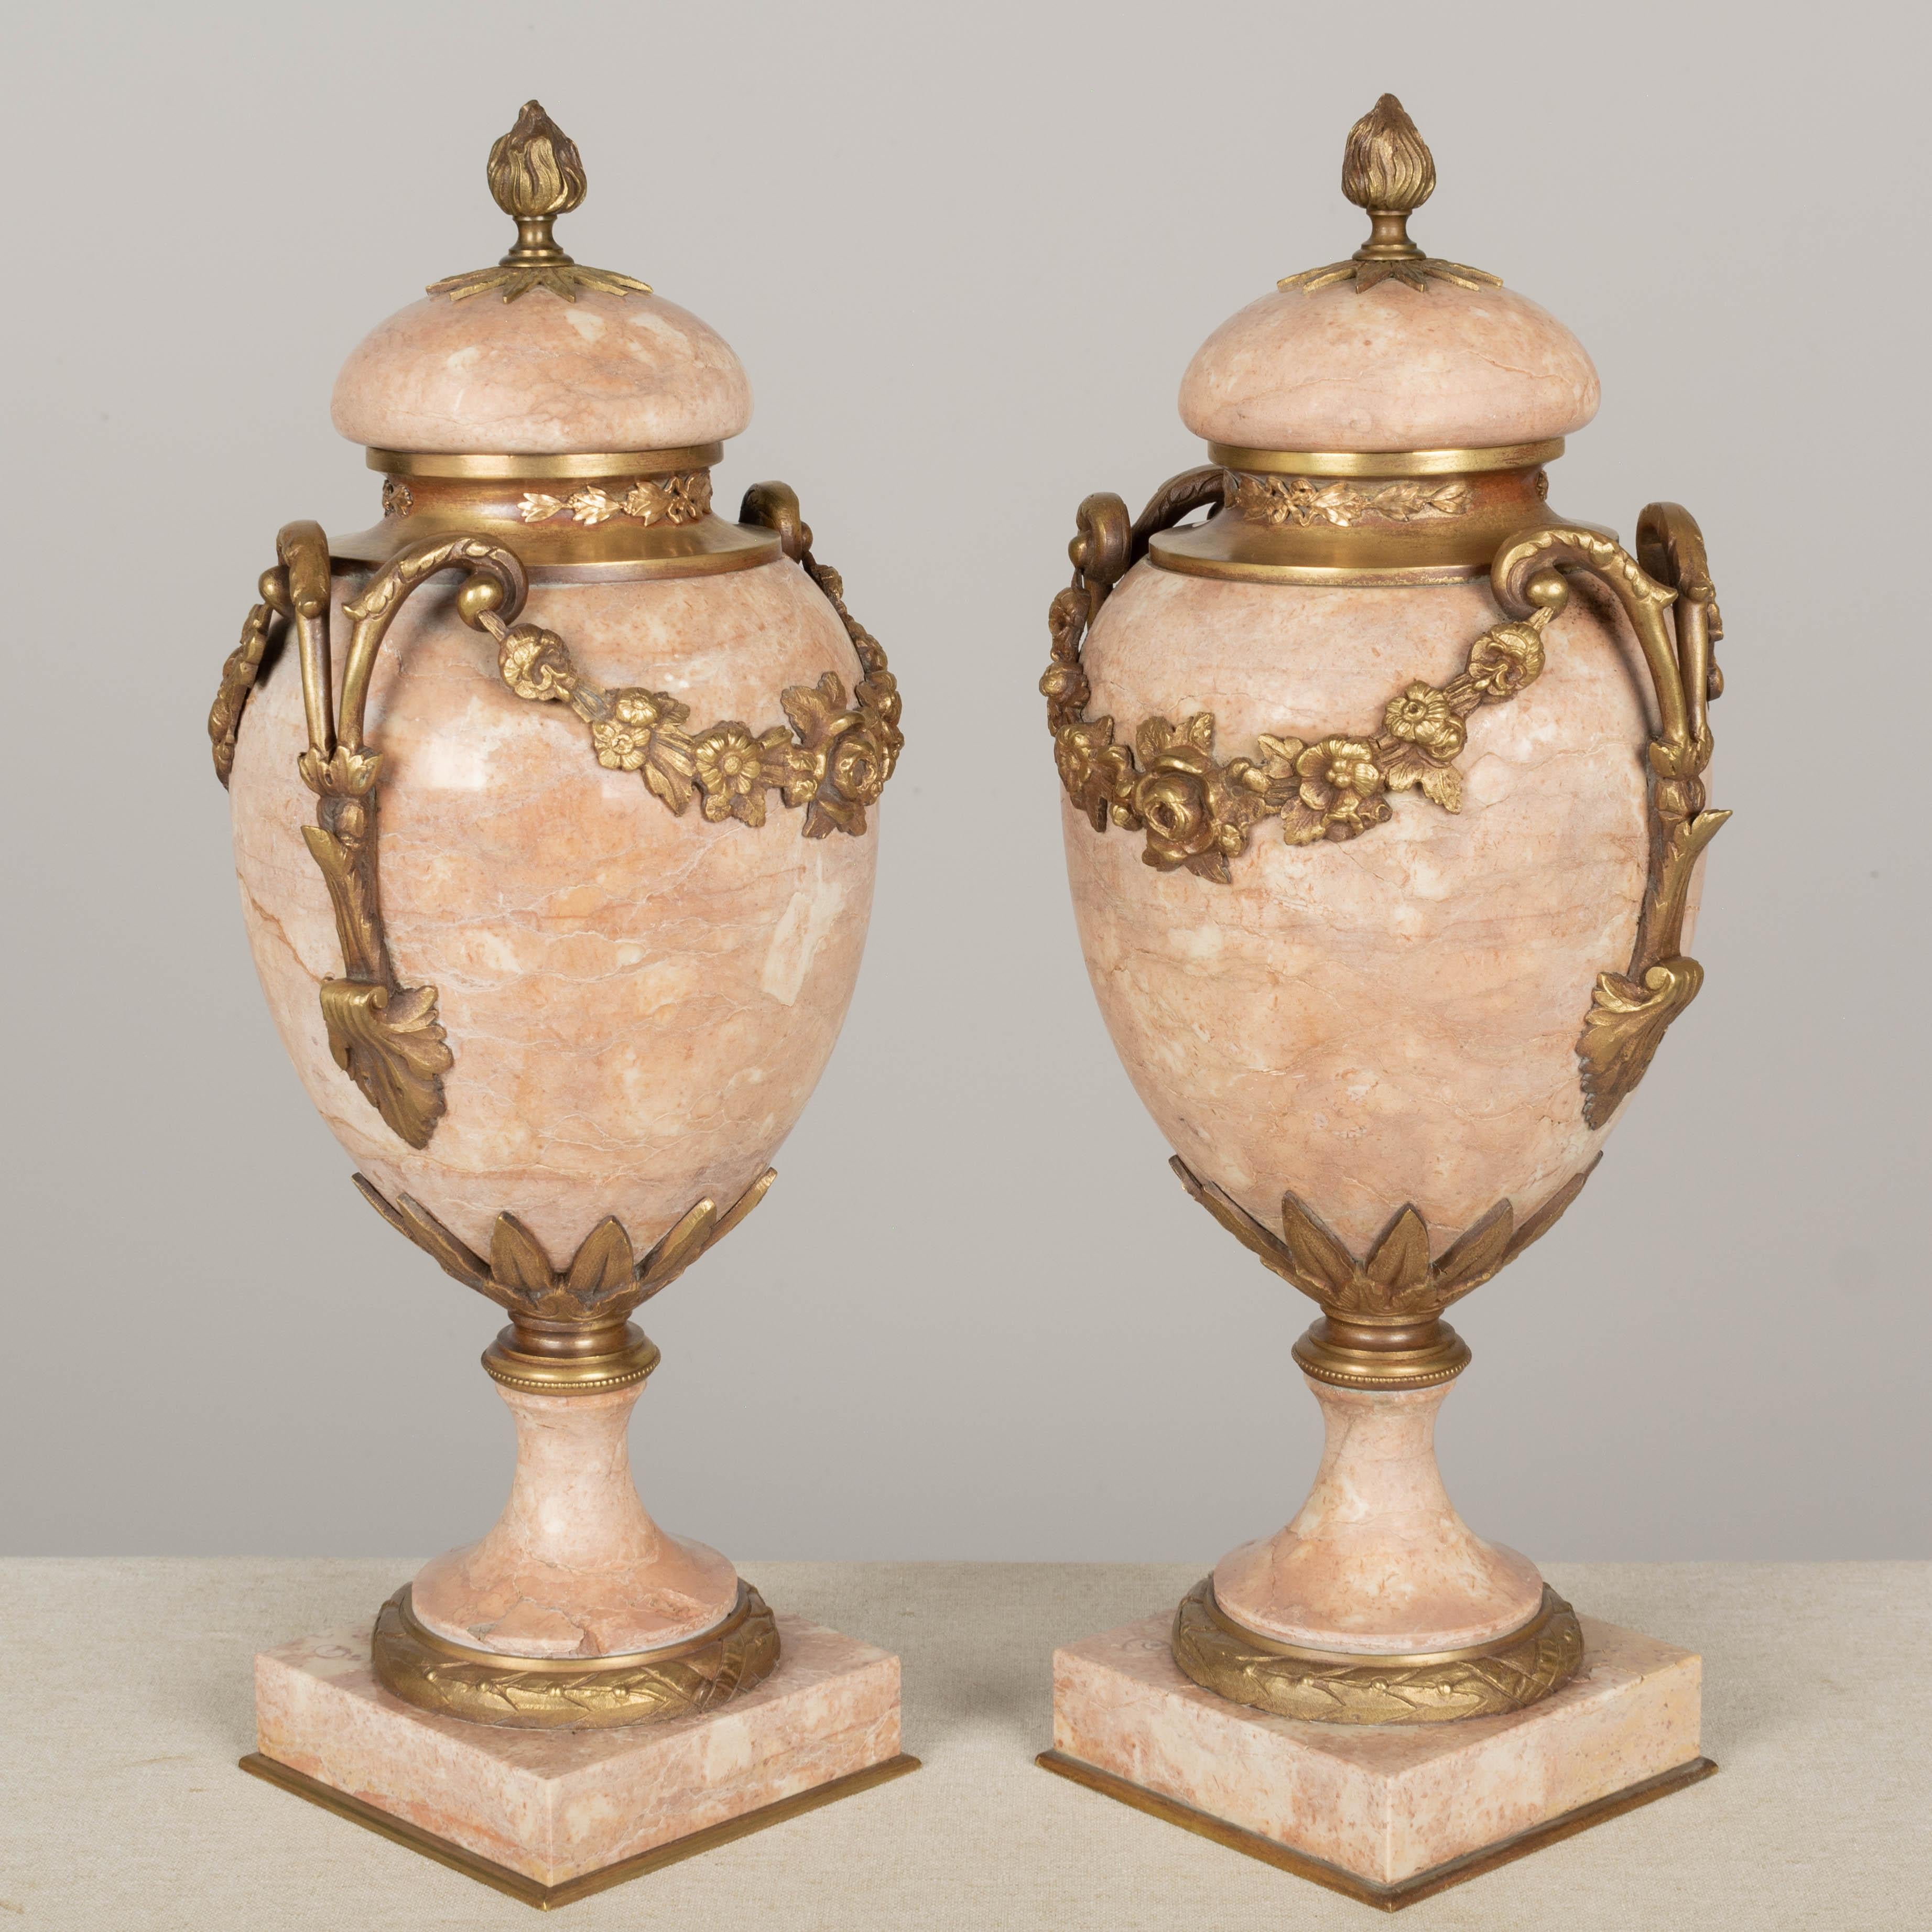 19th Century French Marble and Ormolu Cassolettes Pair For Sale 1